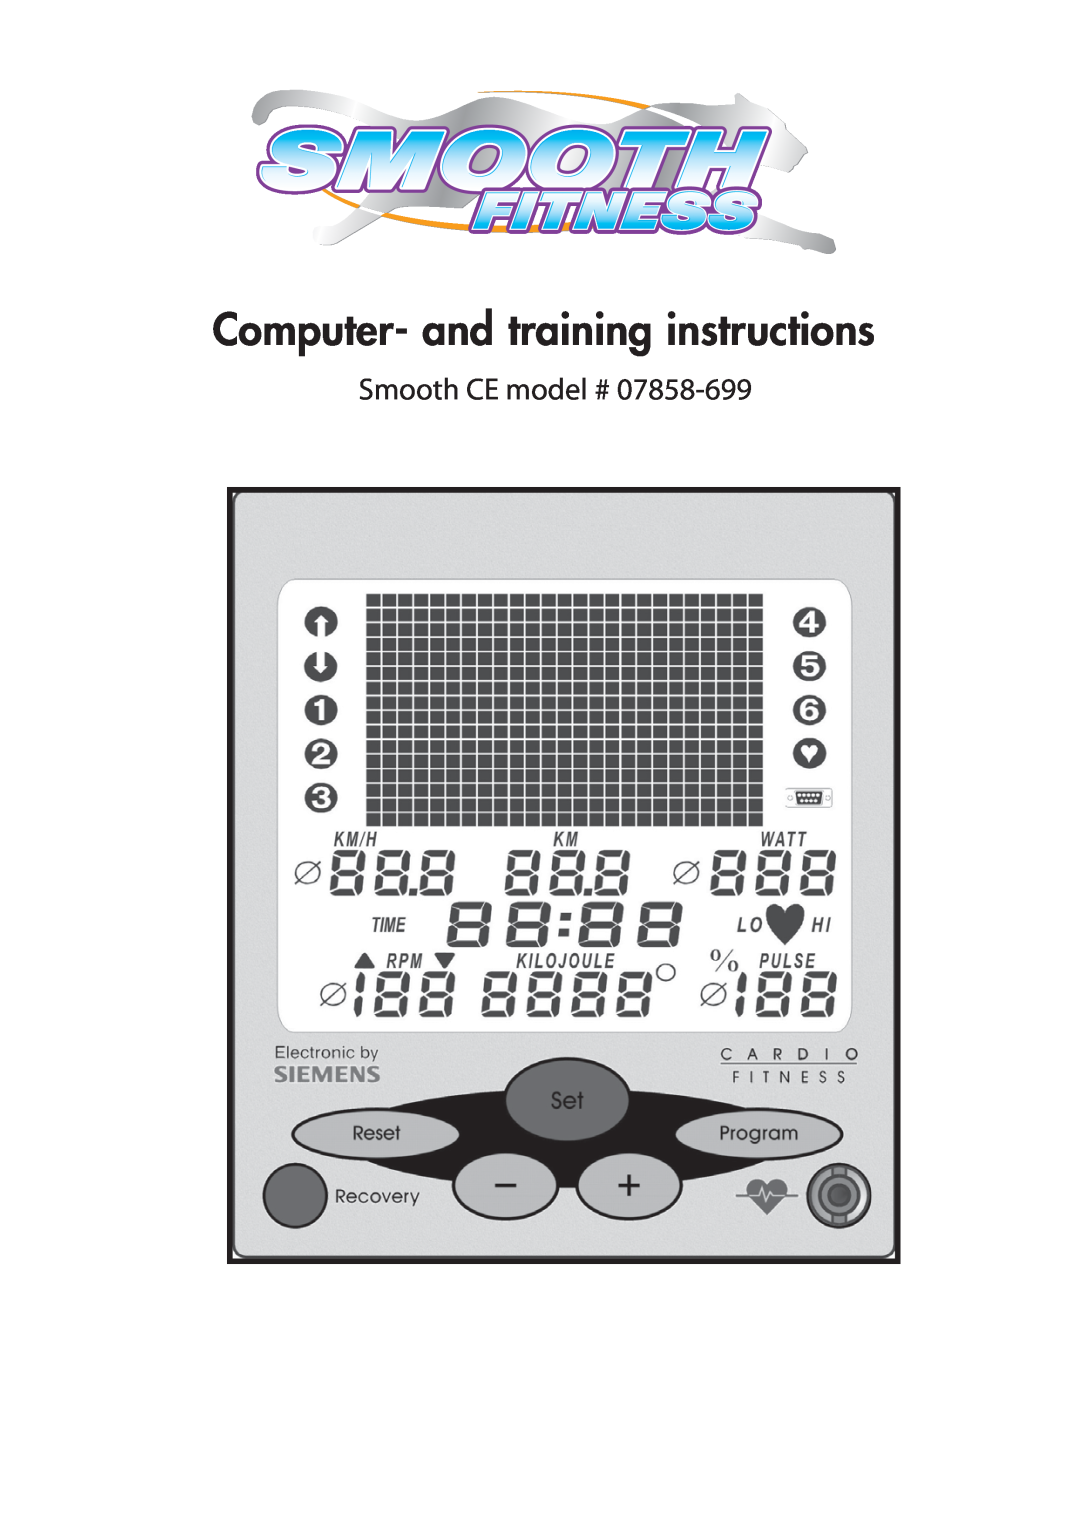 Smooth Fitness 07858-699 manual Computer- and training instructions, Smooth CE model # 